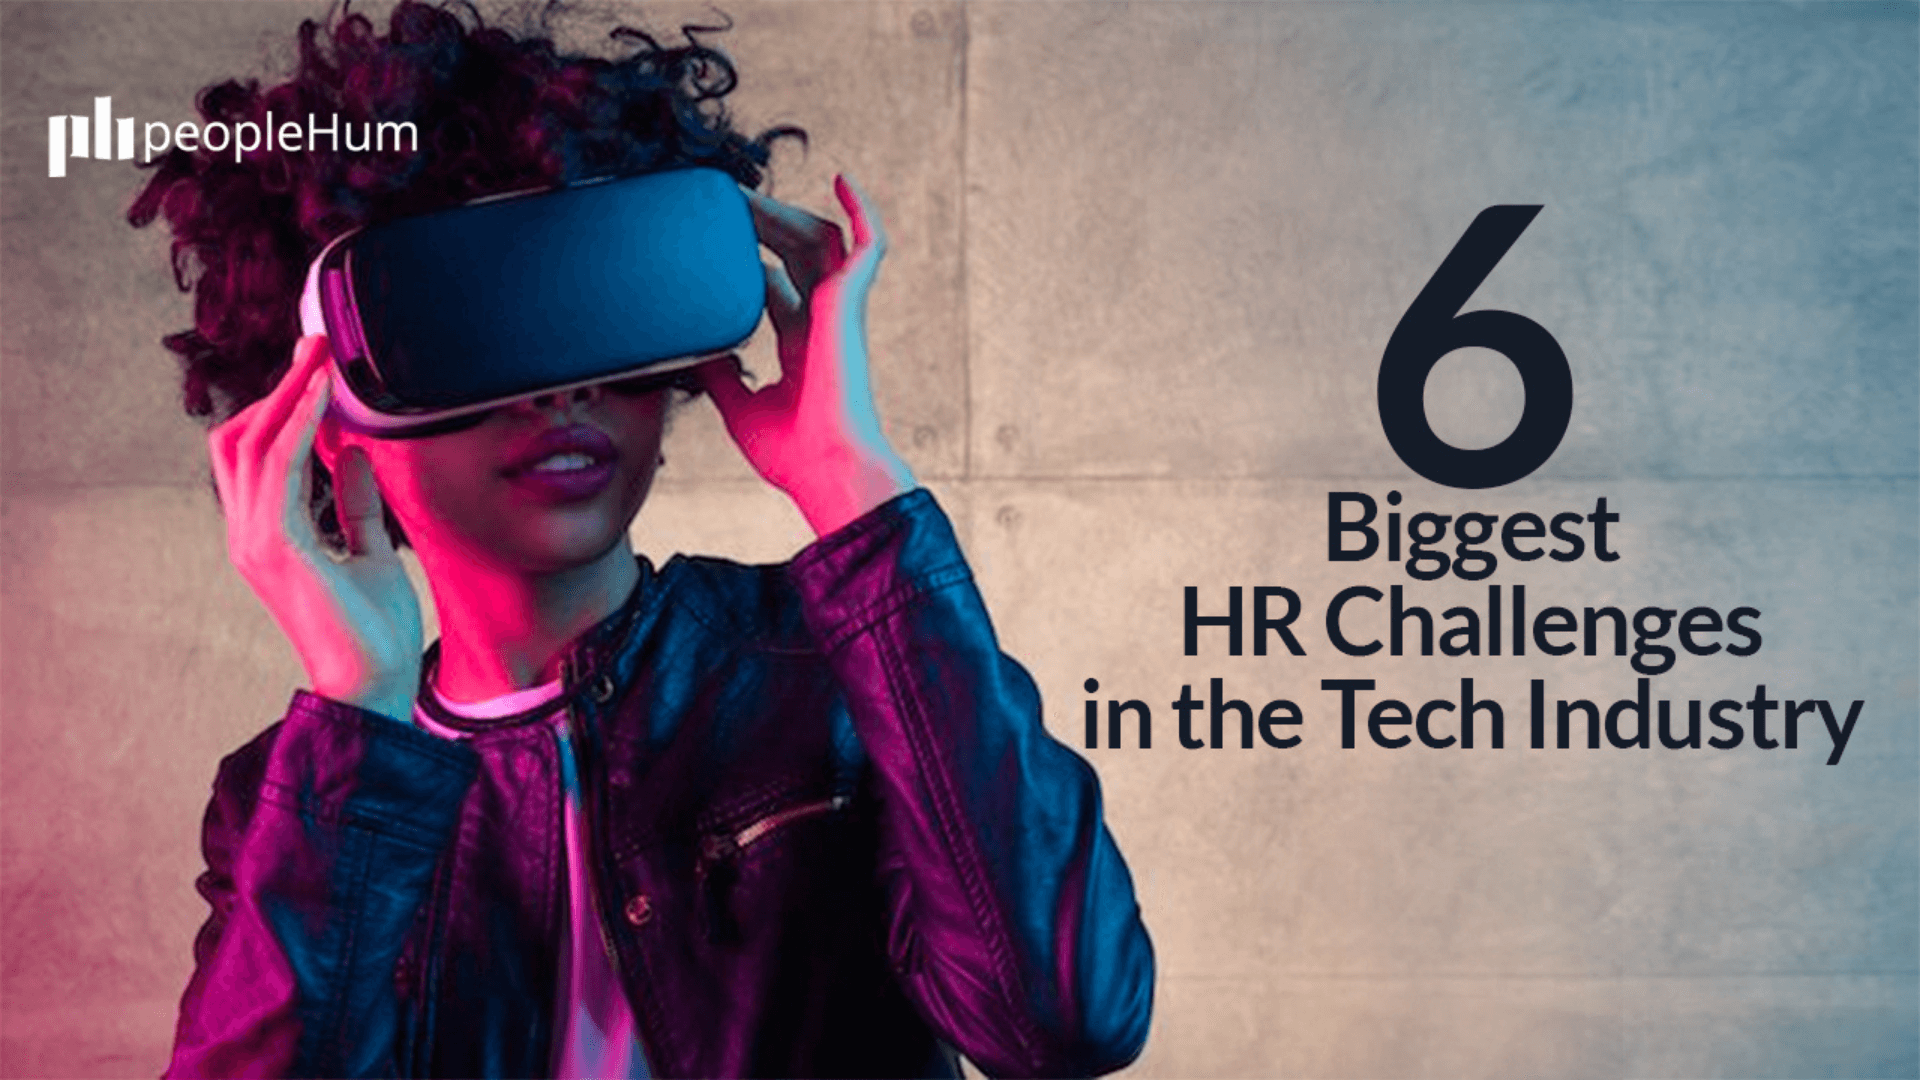 6 Biggest HR Challenges in the Tech Industry